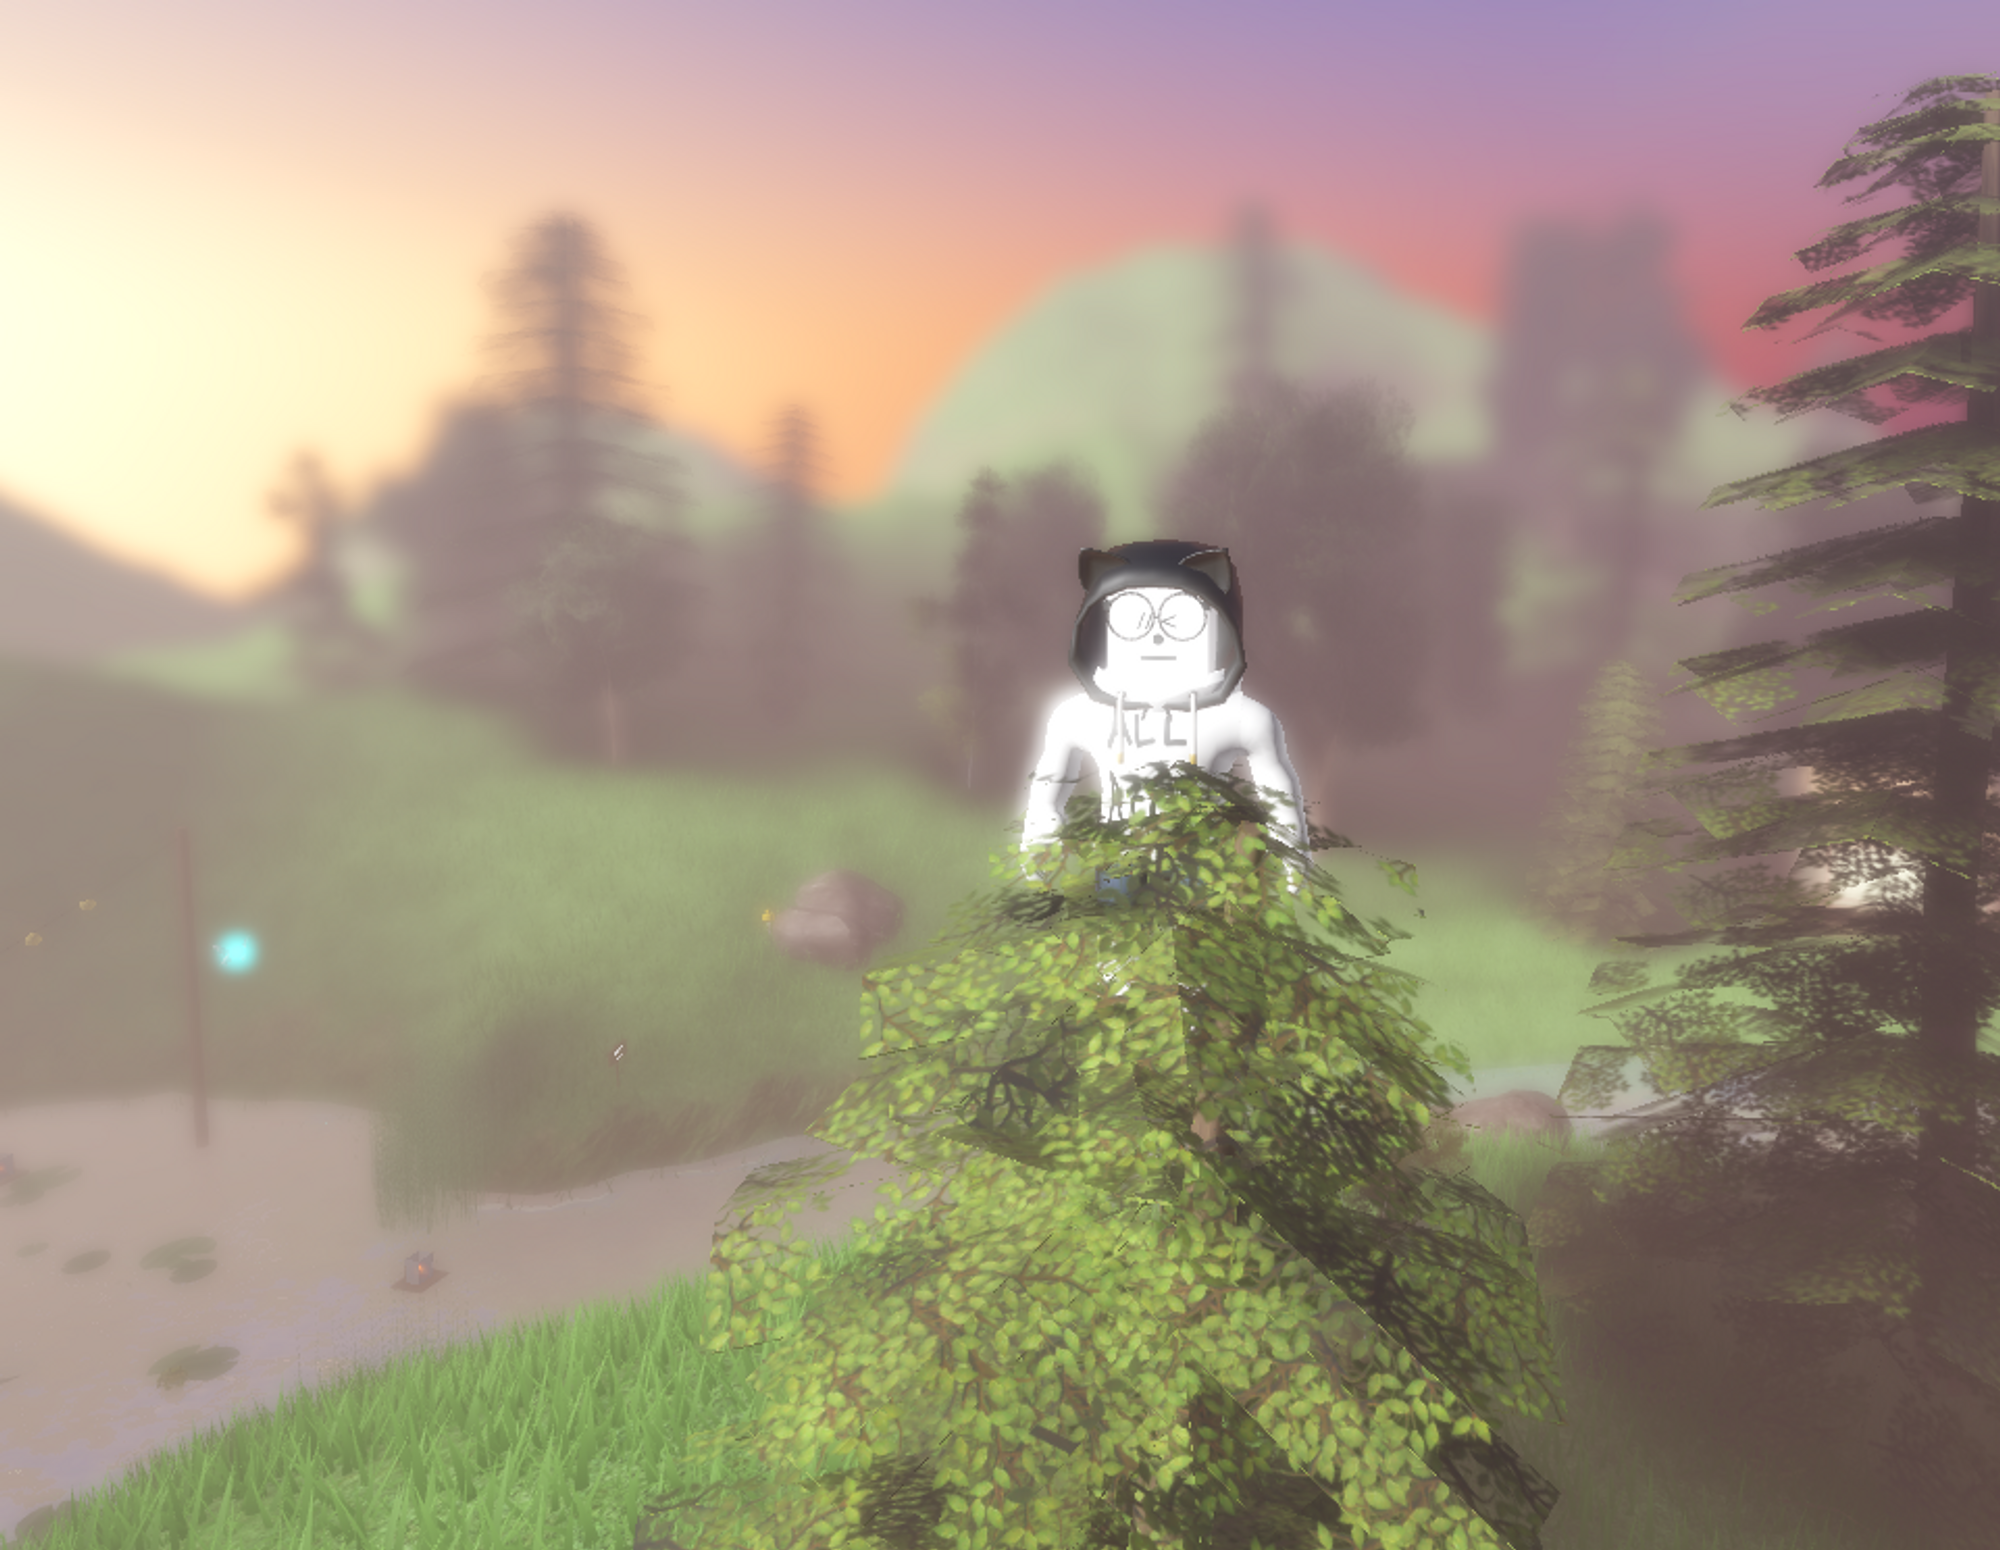 Image of my avatar, a white cartoon-style figure, standing in the top of a pine tree with a blurry mountainous landscape and sunset in the background.